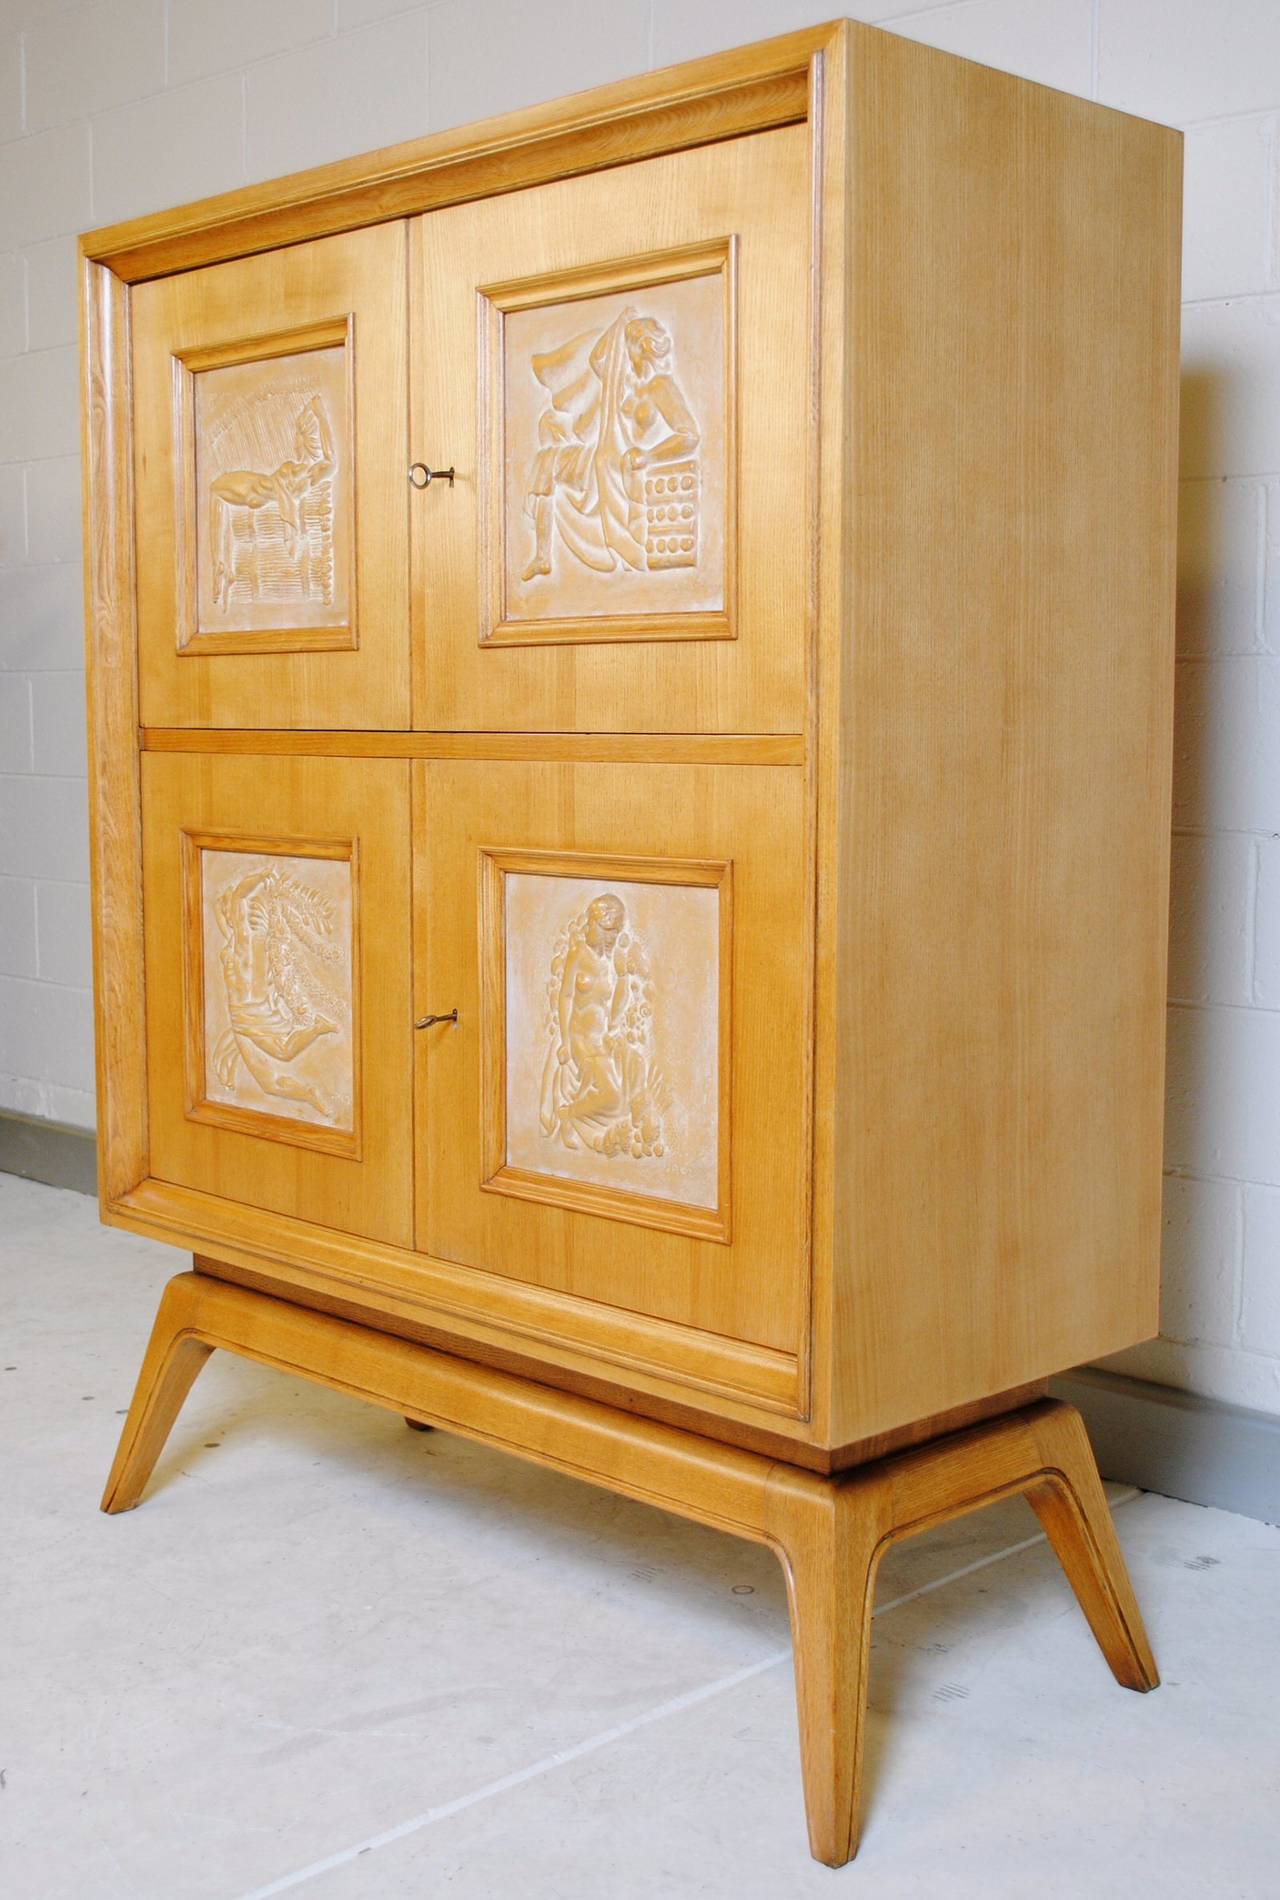 Early 1950s four door Oak cabinet inset with four relief terracotta panels. Each panel revealing a stylized woman and each one bearing a part signature reading 'JACZ'. The cabinet rests on four splayed legs, typical of the period.